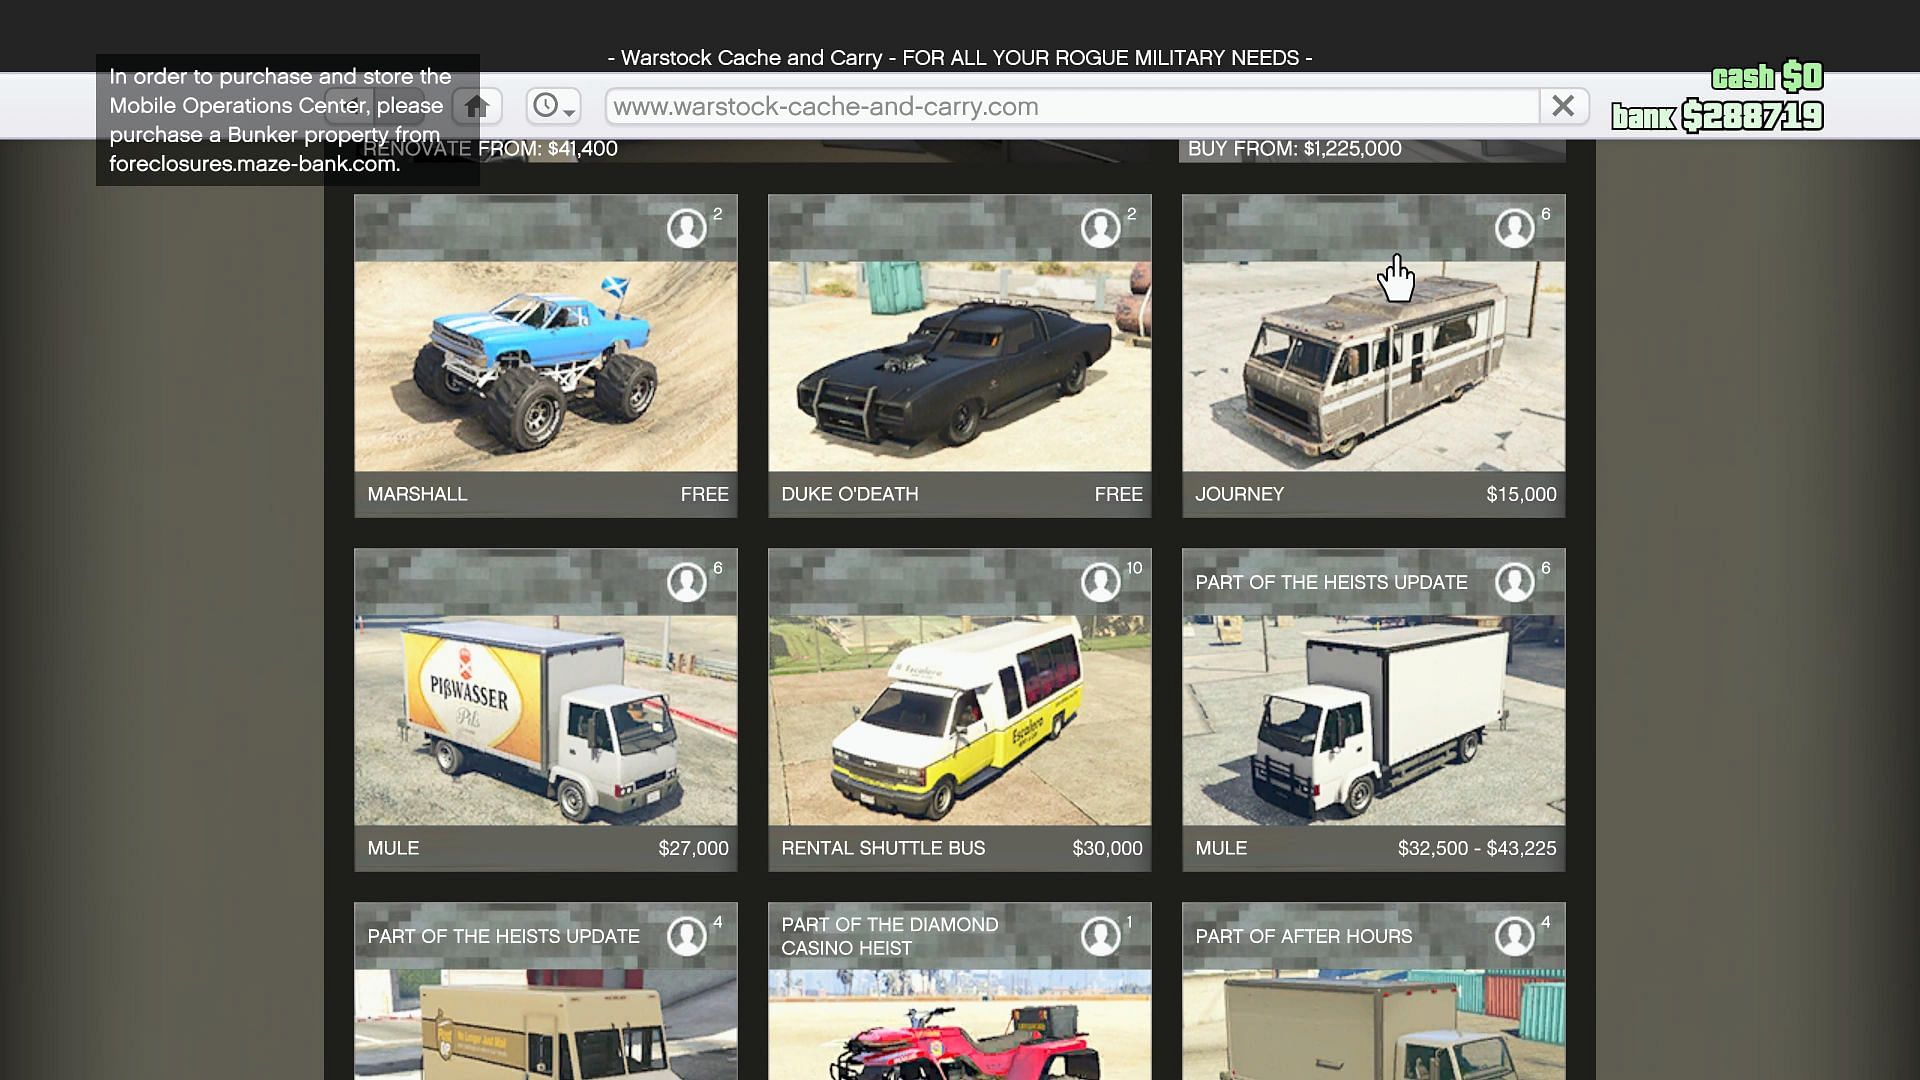 Warstock Cache &amp; Carry&#039;s options (Image via Rockstar Games)